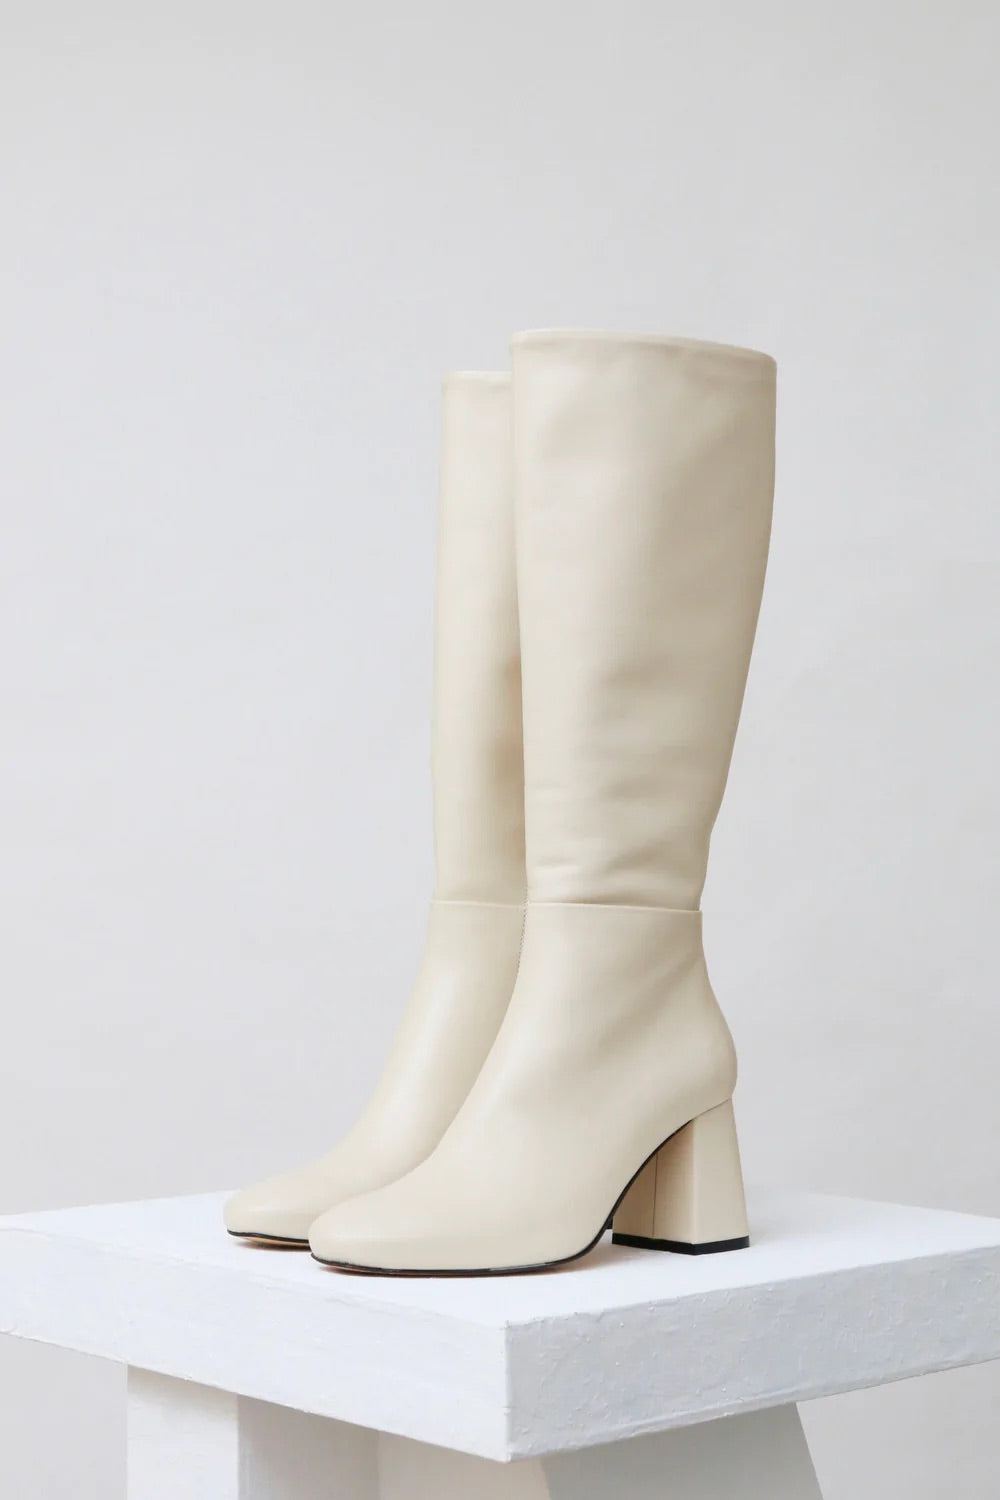 Souliers Martinez - Quitana Calf Leather High Boots: White